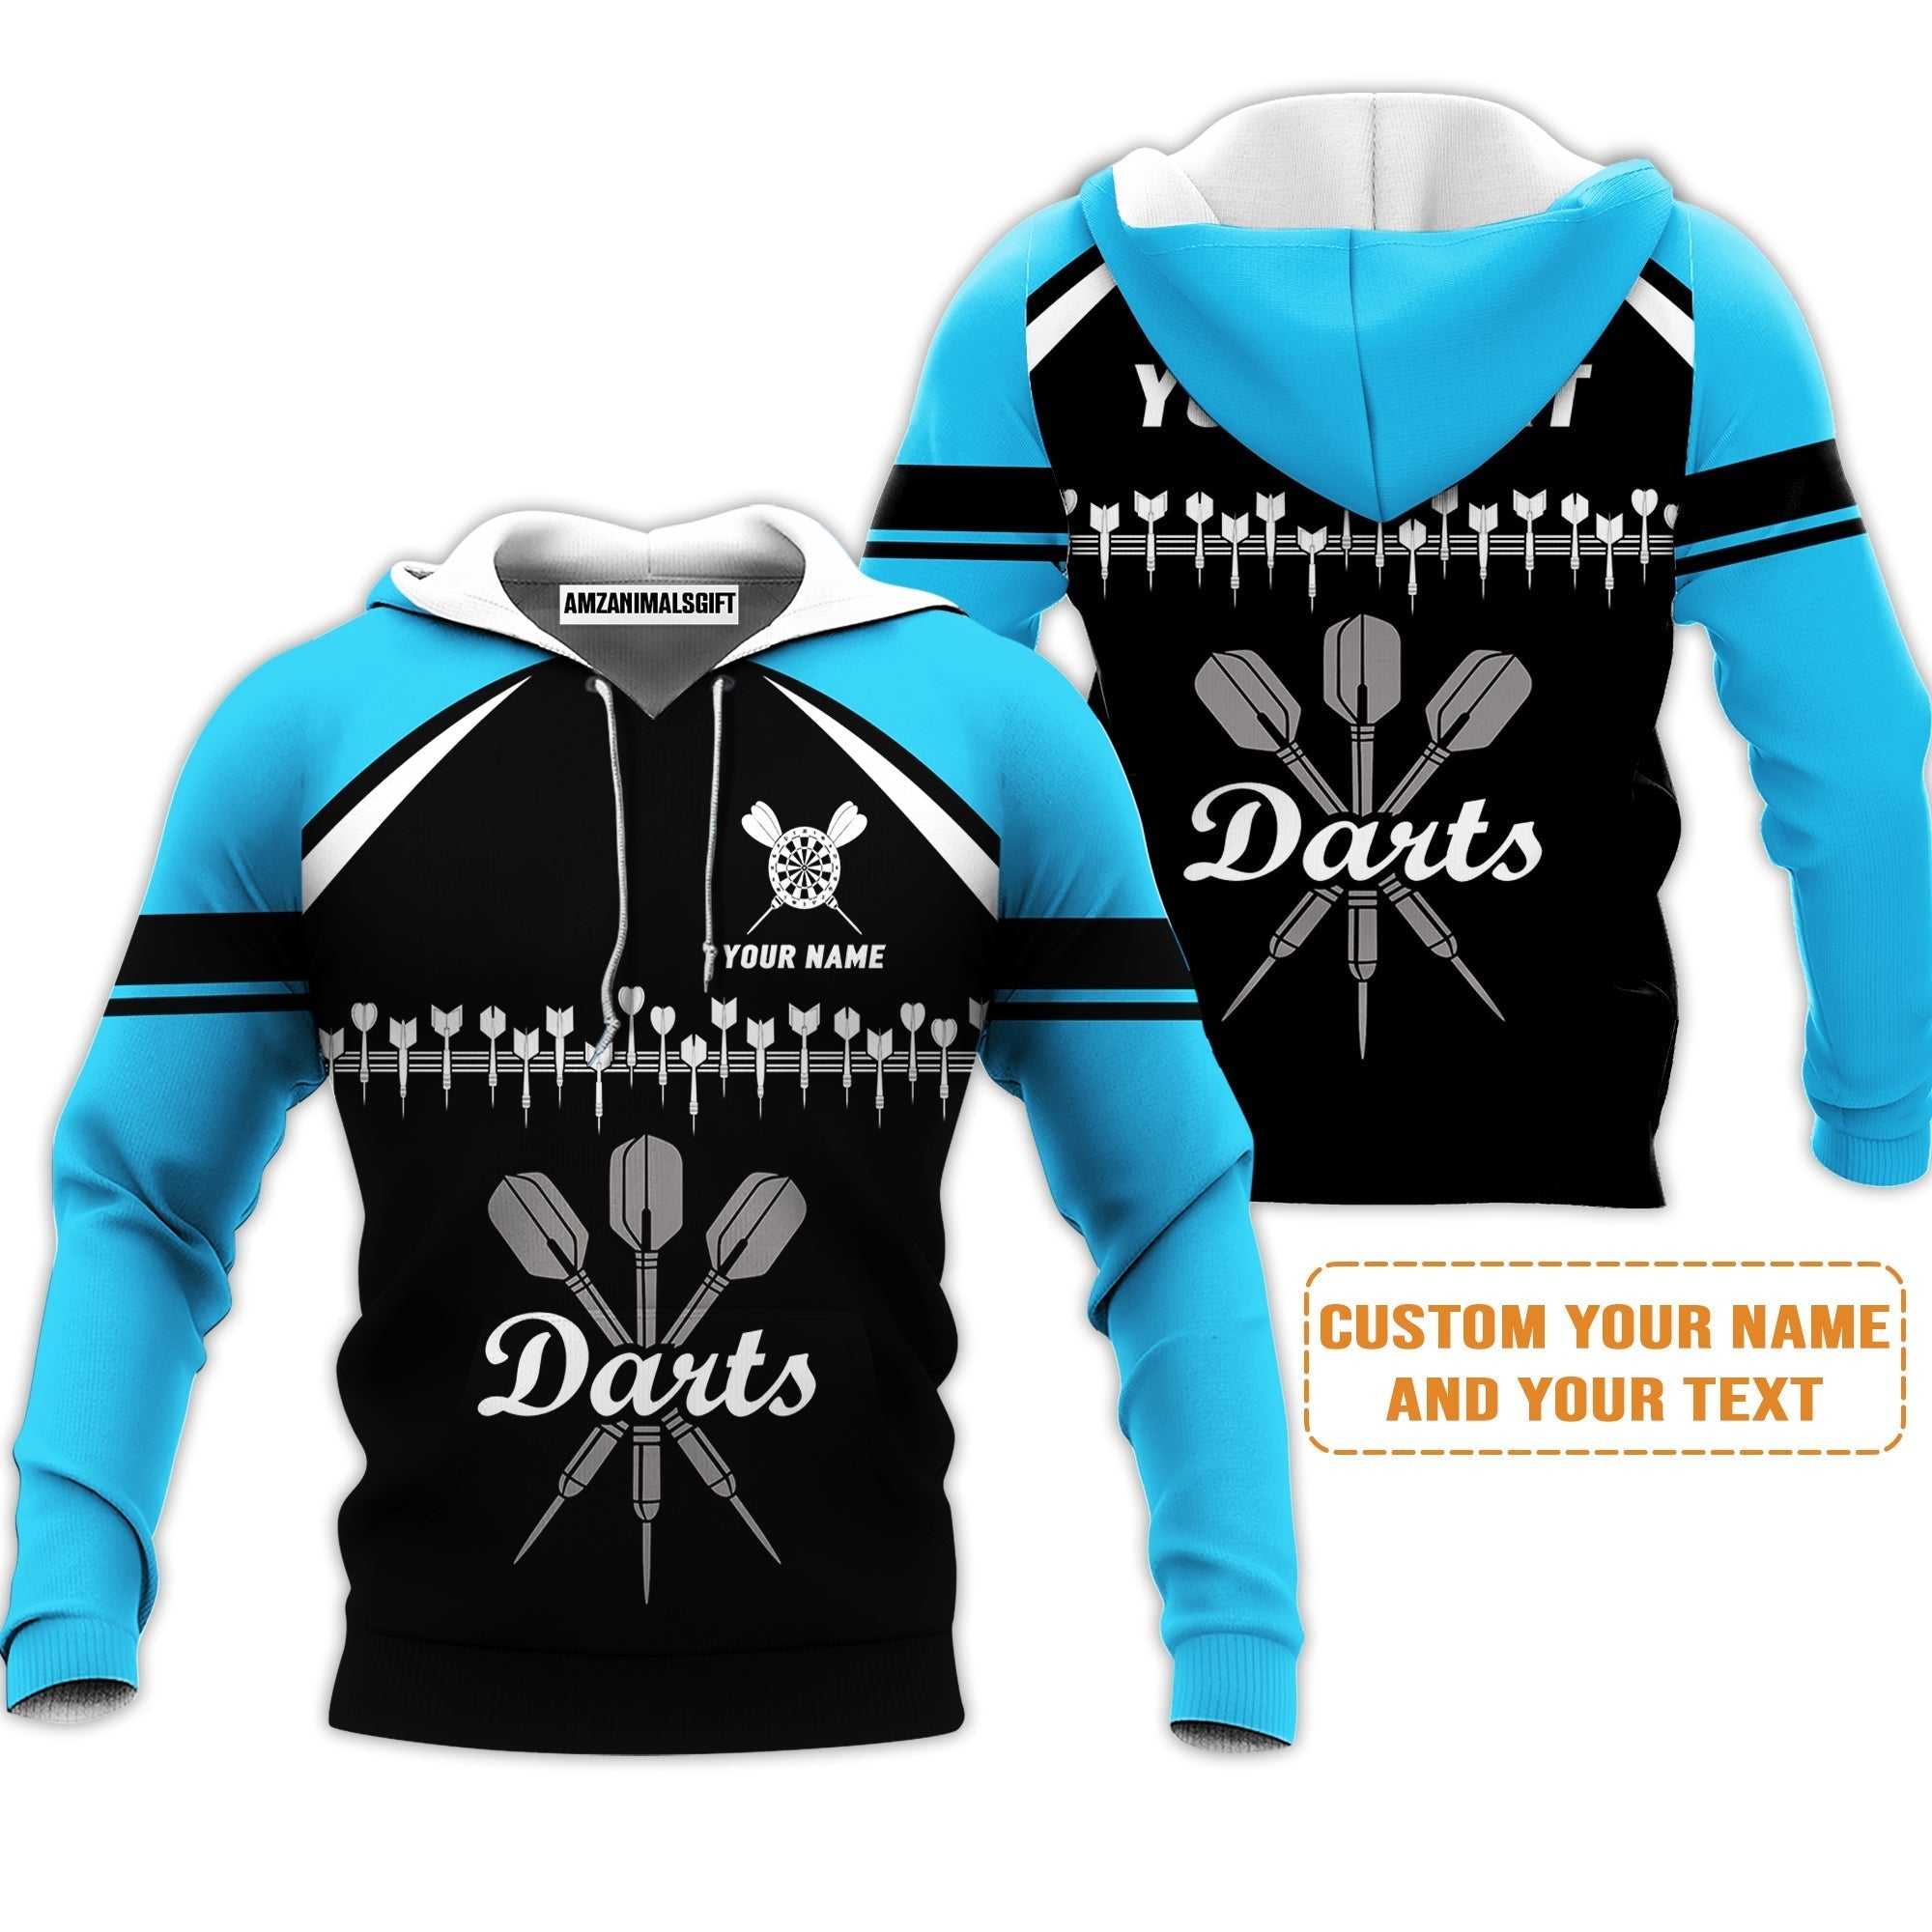 Customized Name & Text Darts Hoodie, Personalized Darts Team Blue Hoodie - Perfect Gift For Darts Lovers